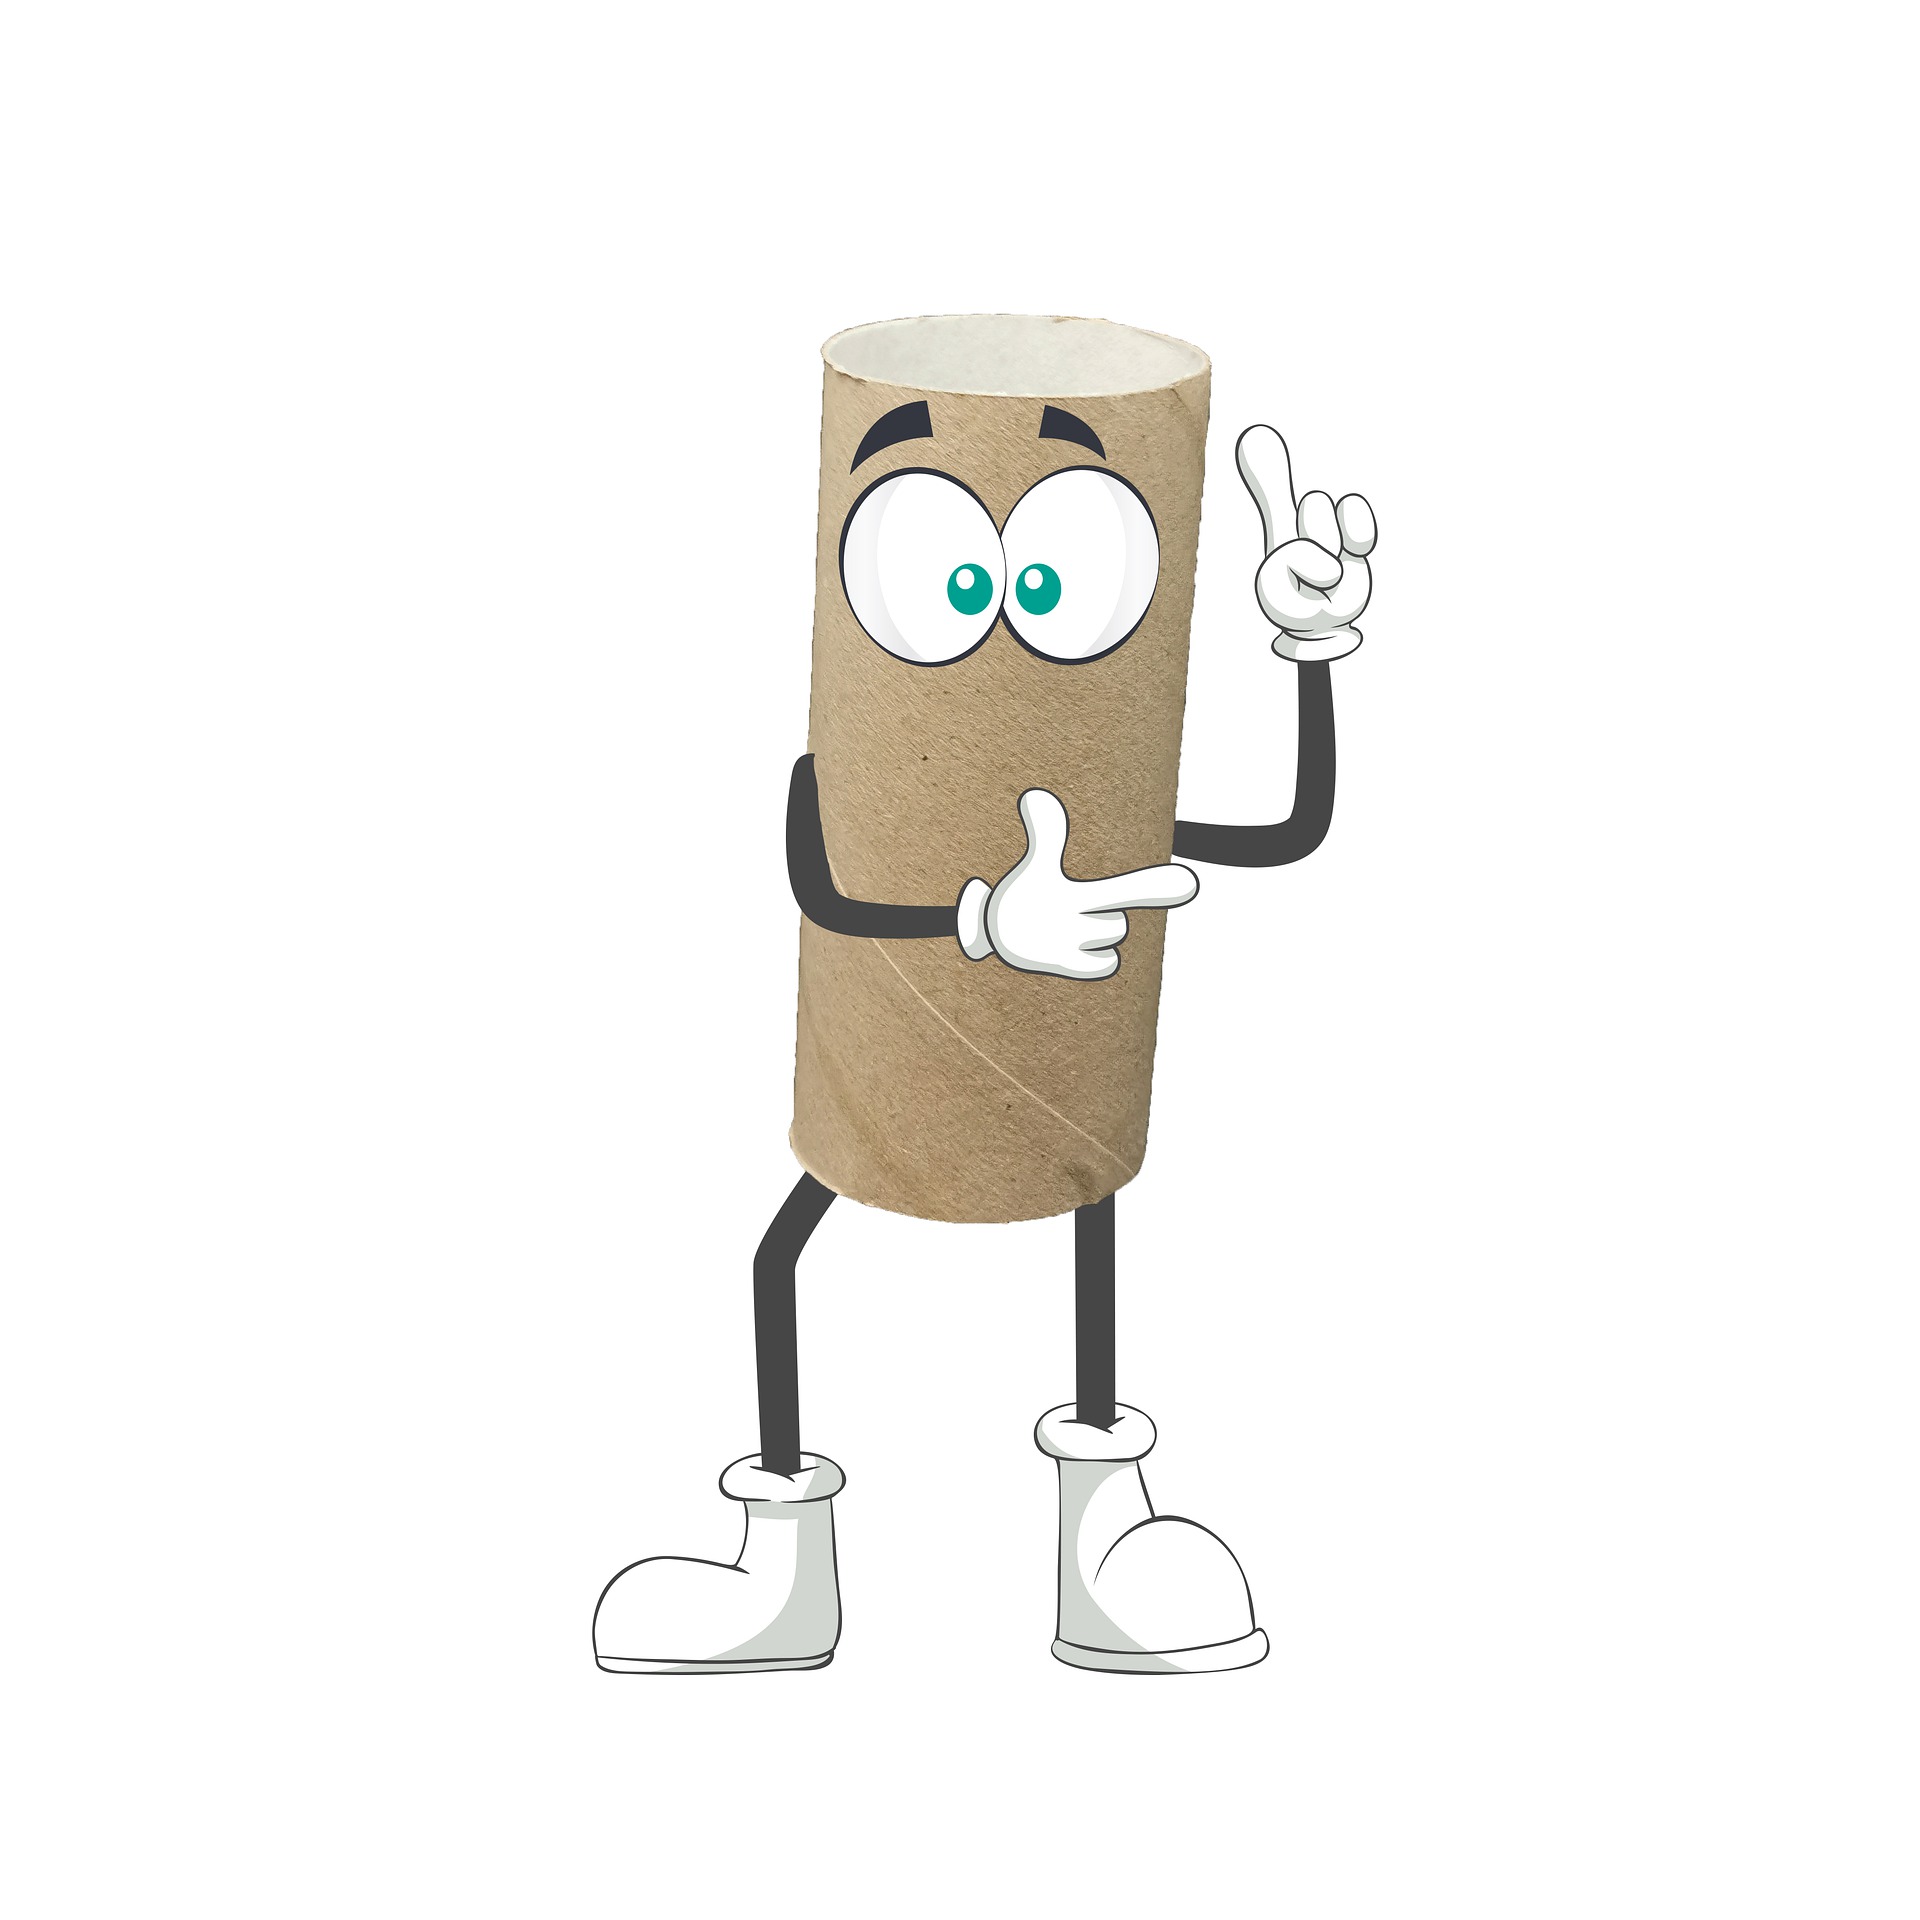 A used toilet paper roll, with eyes, arms and legs attached.